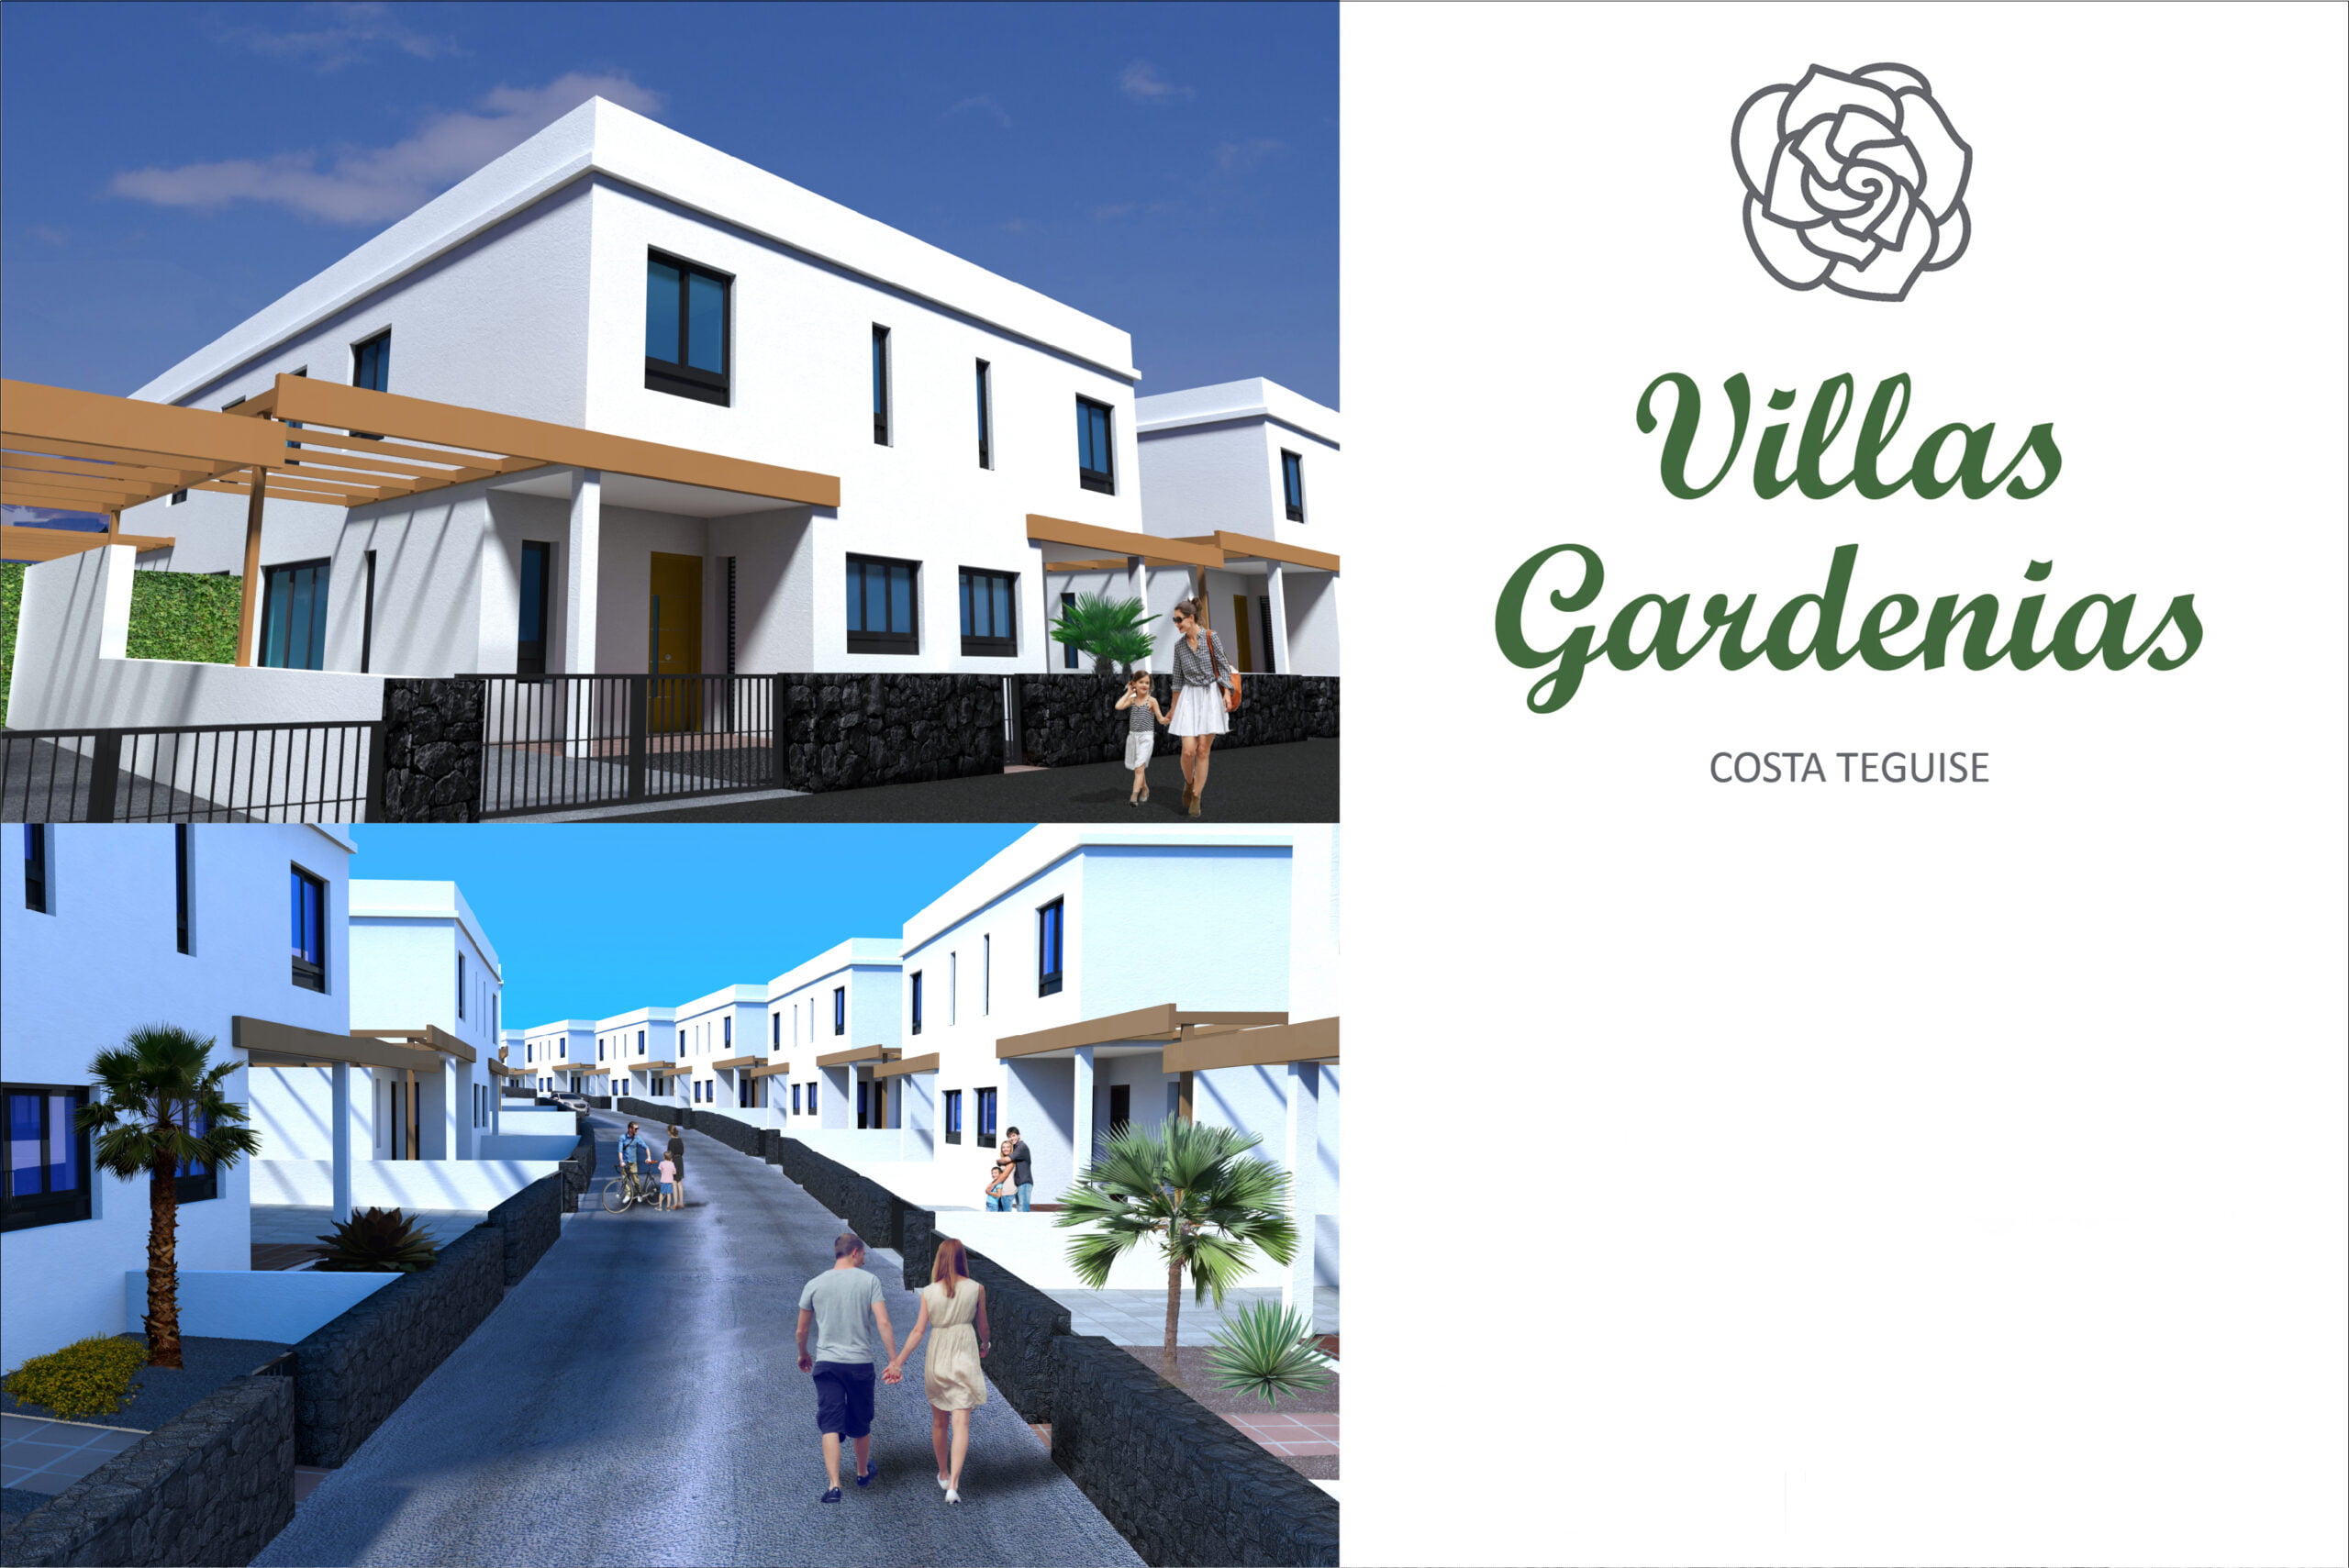 Fantastic Opportunity To Buy A Semi Detached Villa for sale In Lanzarote, Costa Teguise On Plan With The Most Modern Specifications In A Quiet Residential Area.